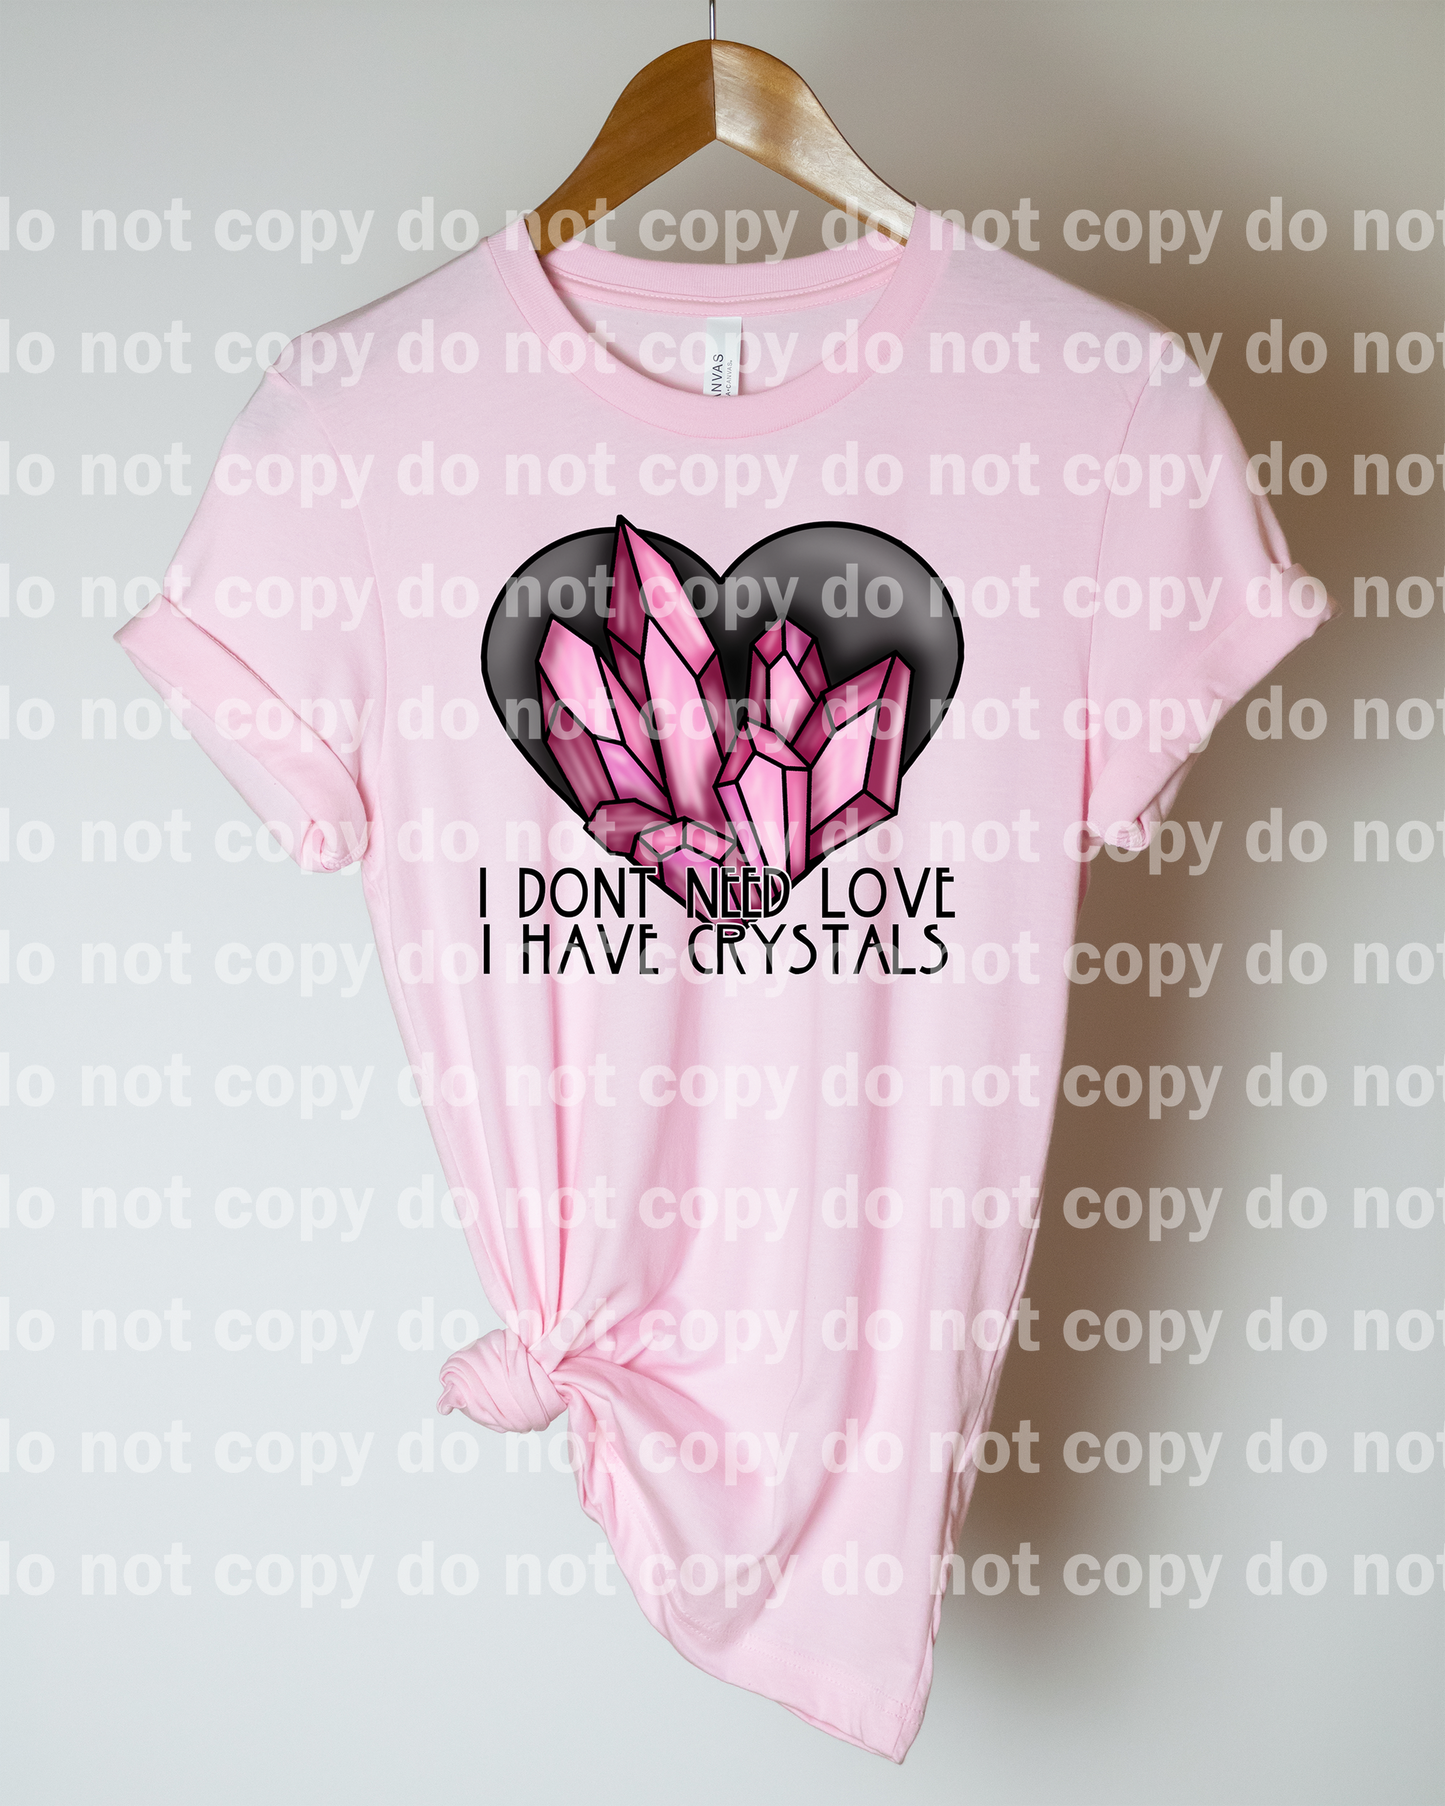 I Don't Need Love I Have Crystals Dark Dream Print or Sublimation Print